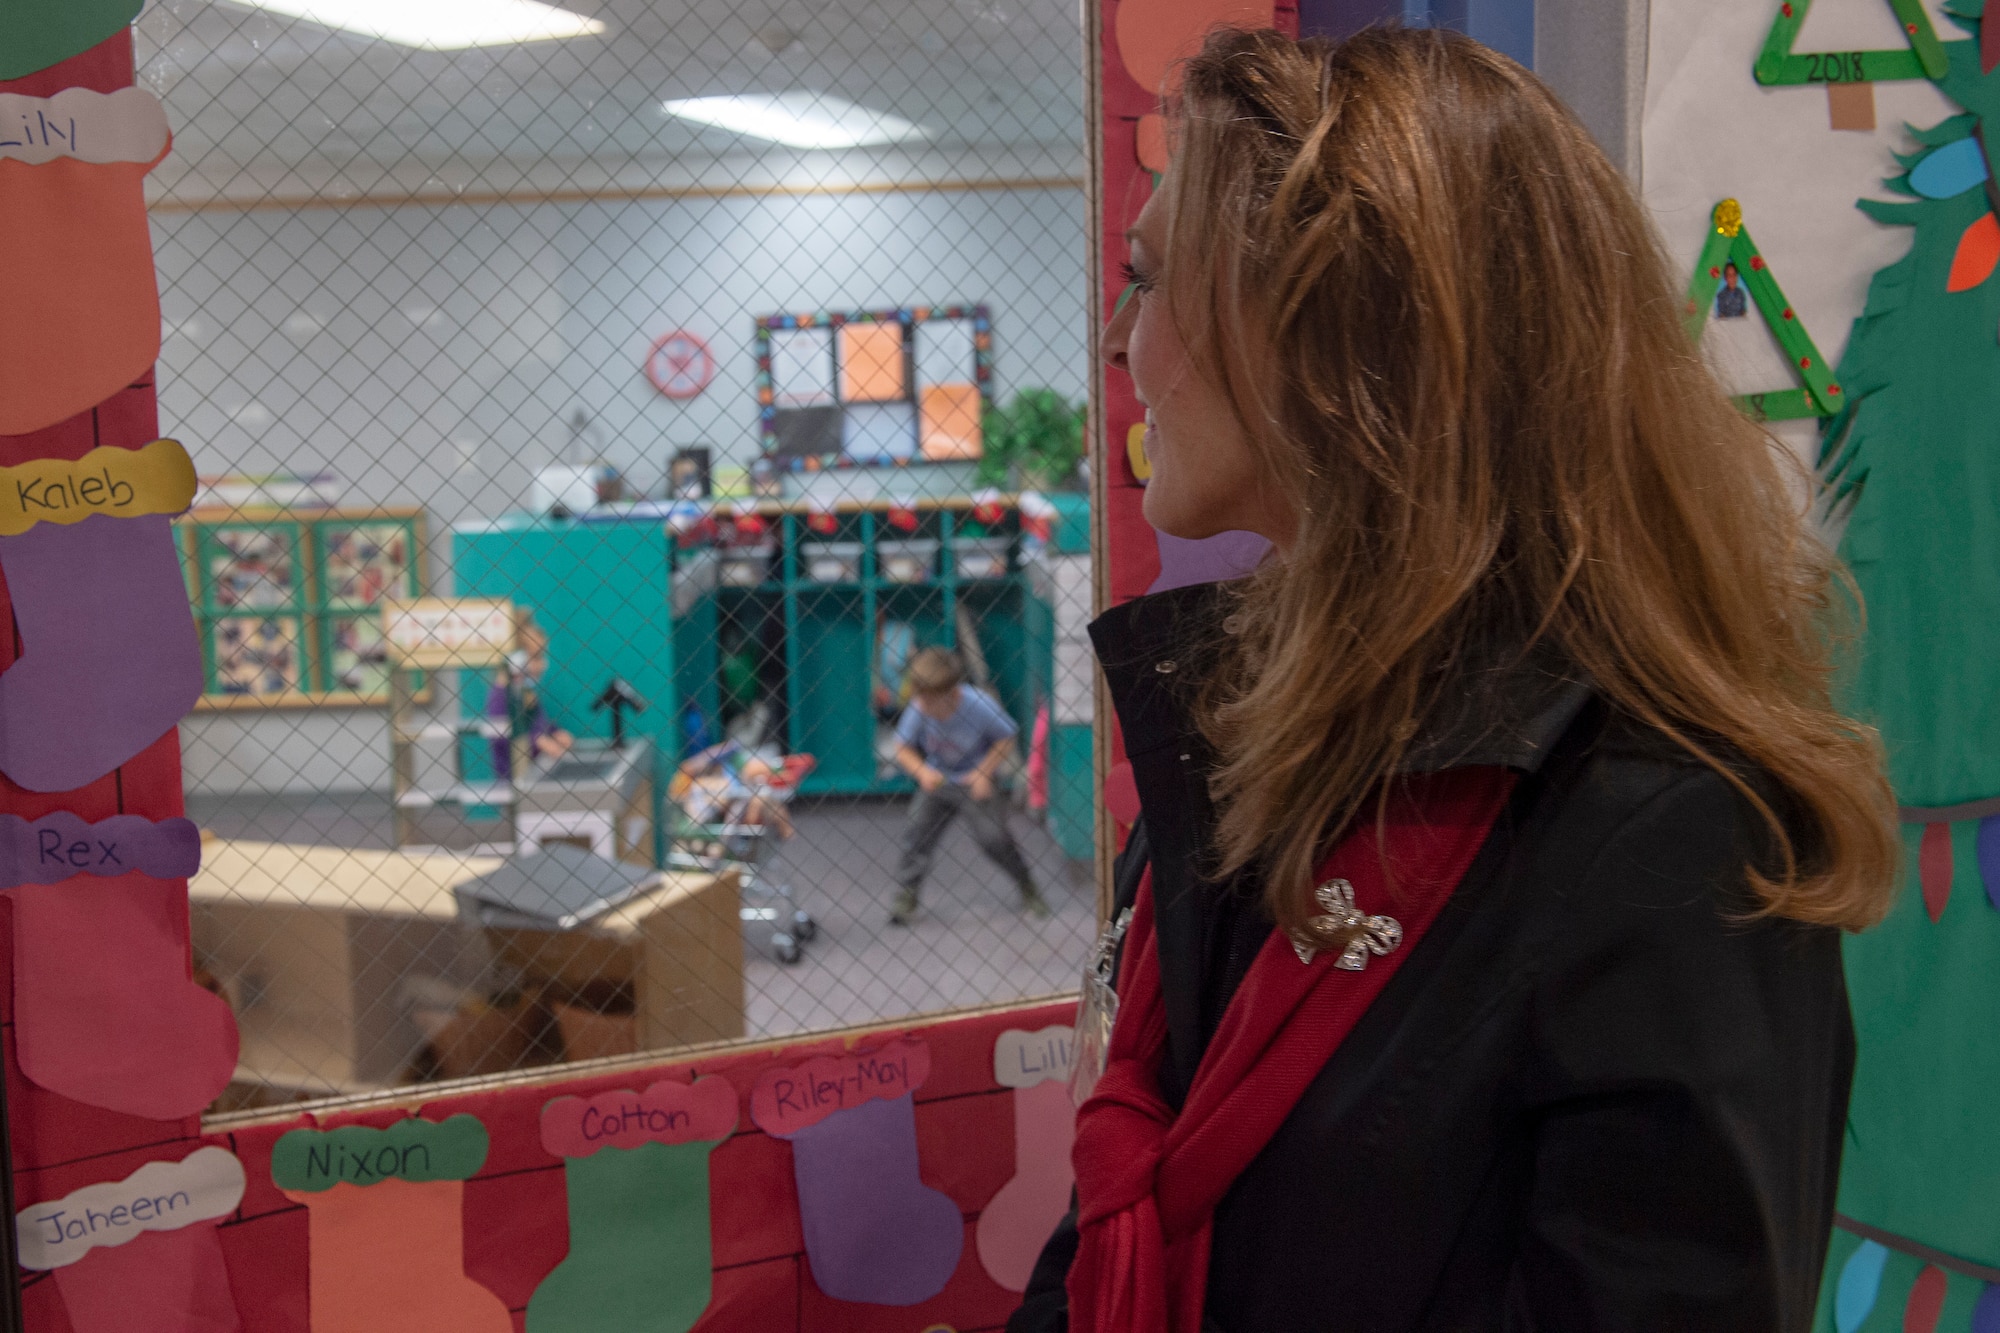 Joni Kwast, wife of U.S. Air Force Lt. Gen. Steven Kwast, commander of Air Education and Training Command, watches children play at the Child Development Center, Dec. 18, 2018, at Altus Air Force Base, Okla. The tours were designed so they could learn more about the inner workings of the base and how AETC can support it in future operations. (U.S. Air Force Photo by Senior Airman Jackson N. Haddon)